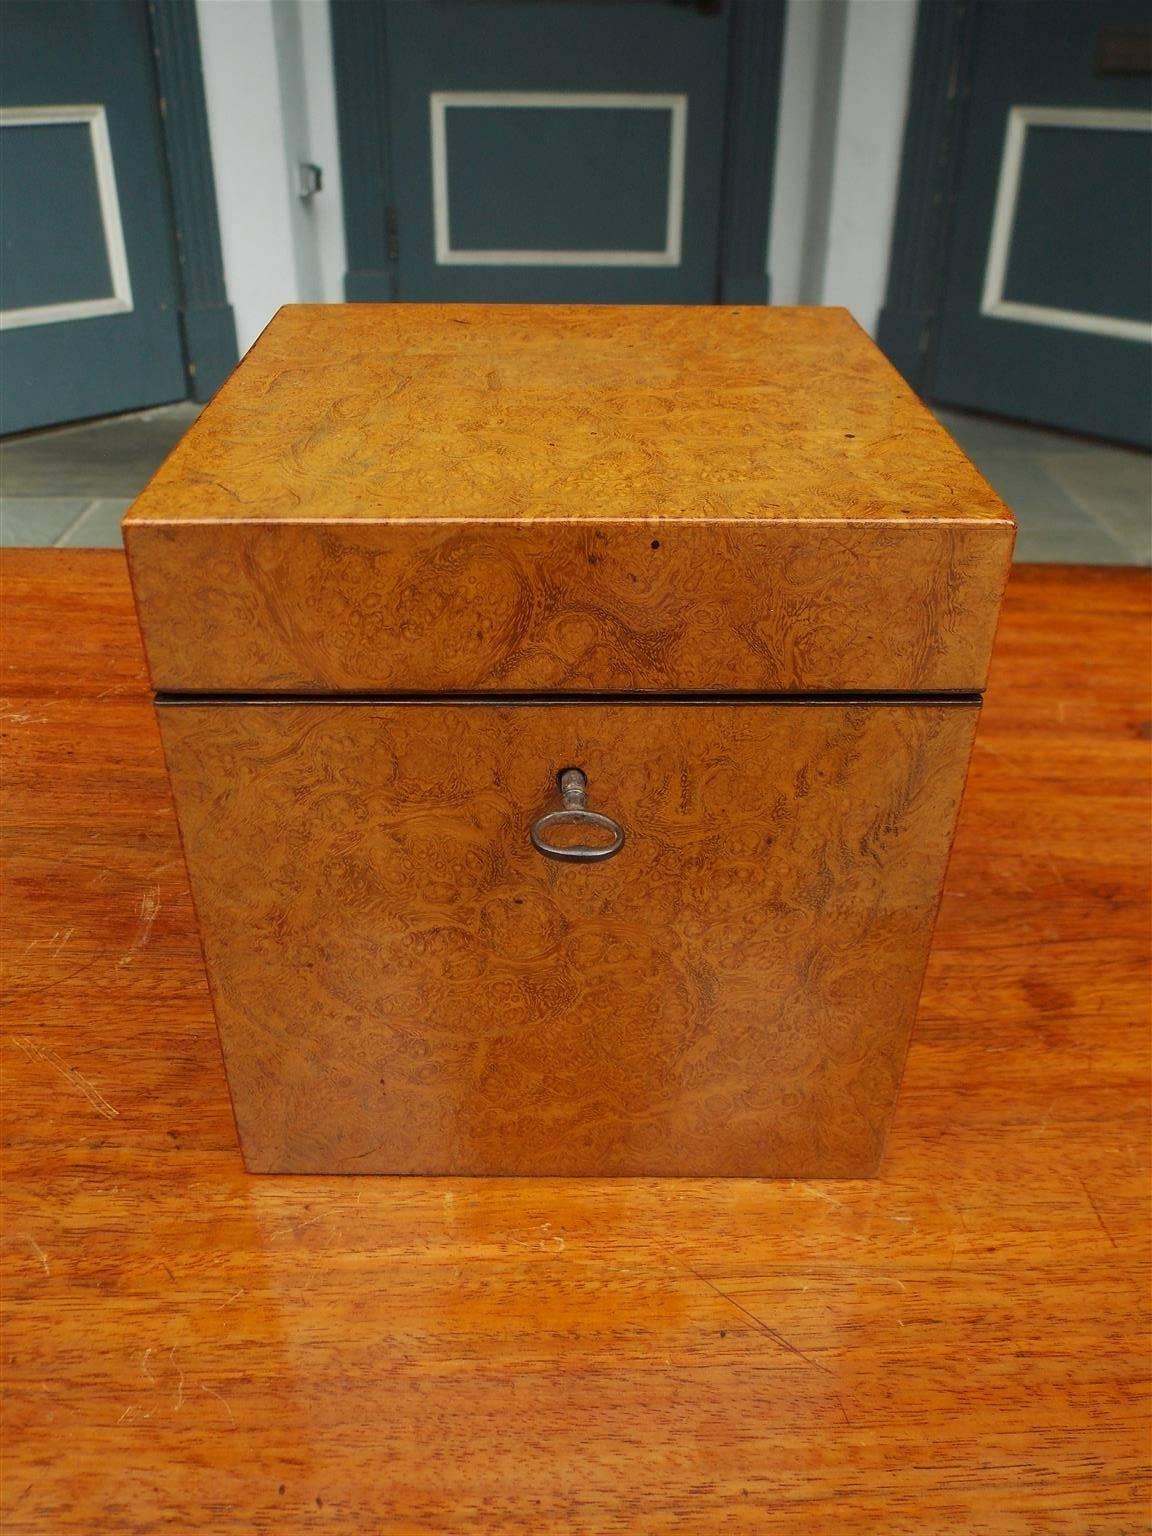 Chinese burl walnut hinged tea caddy with the original five decorative floral Pewter bins with lids. Tea Caddy retains the original lock and key. Bins are signed by maker, Early 19th Century.